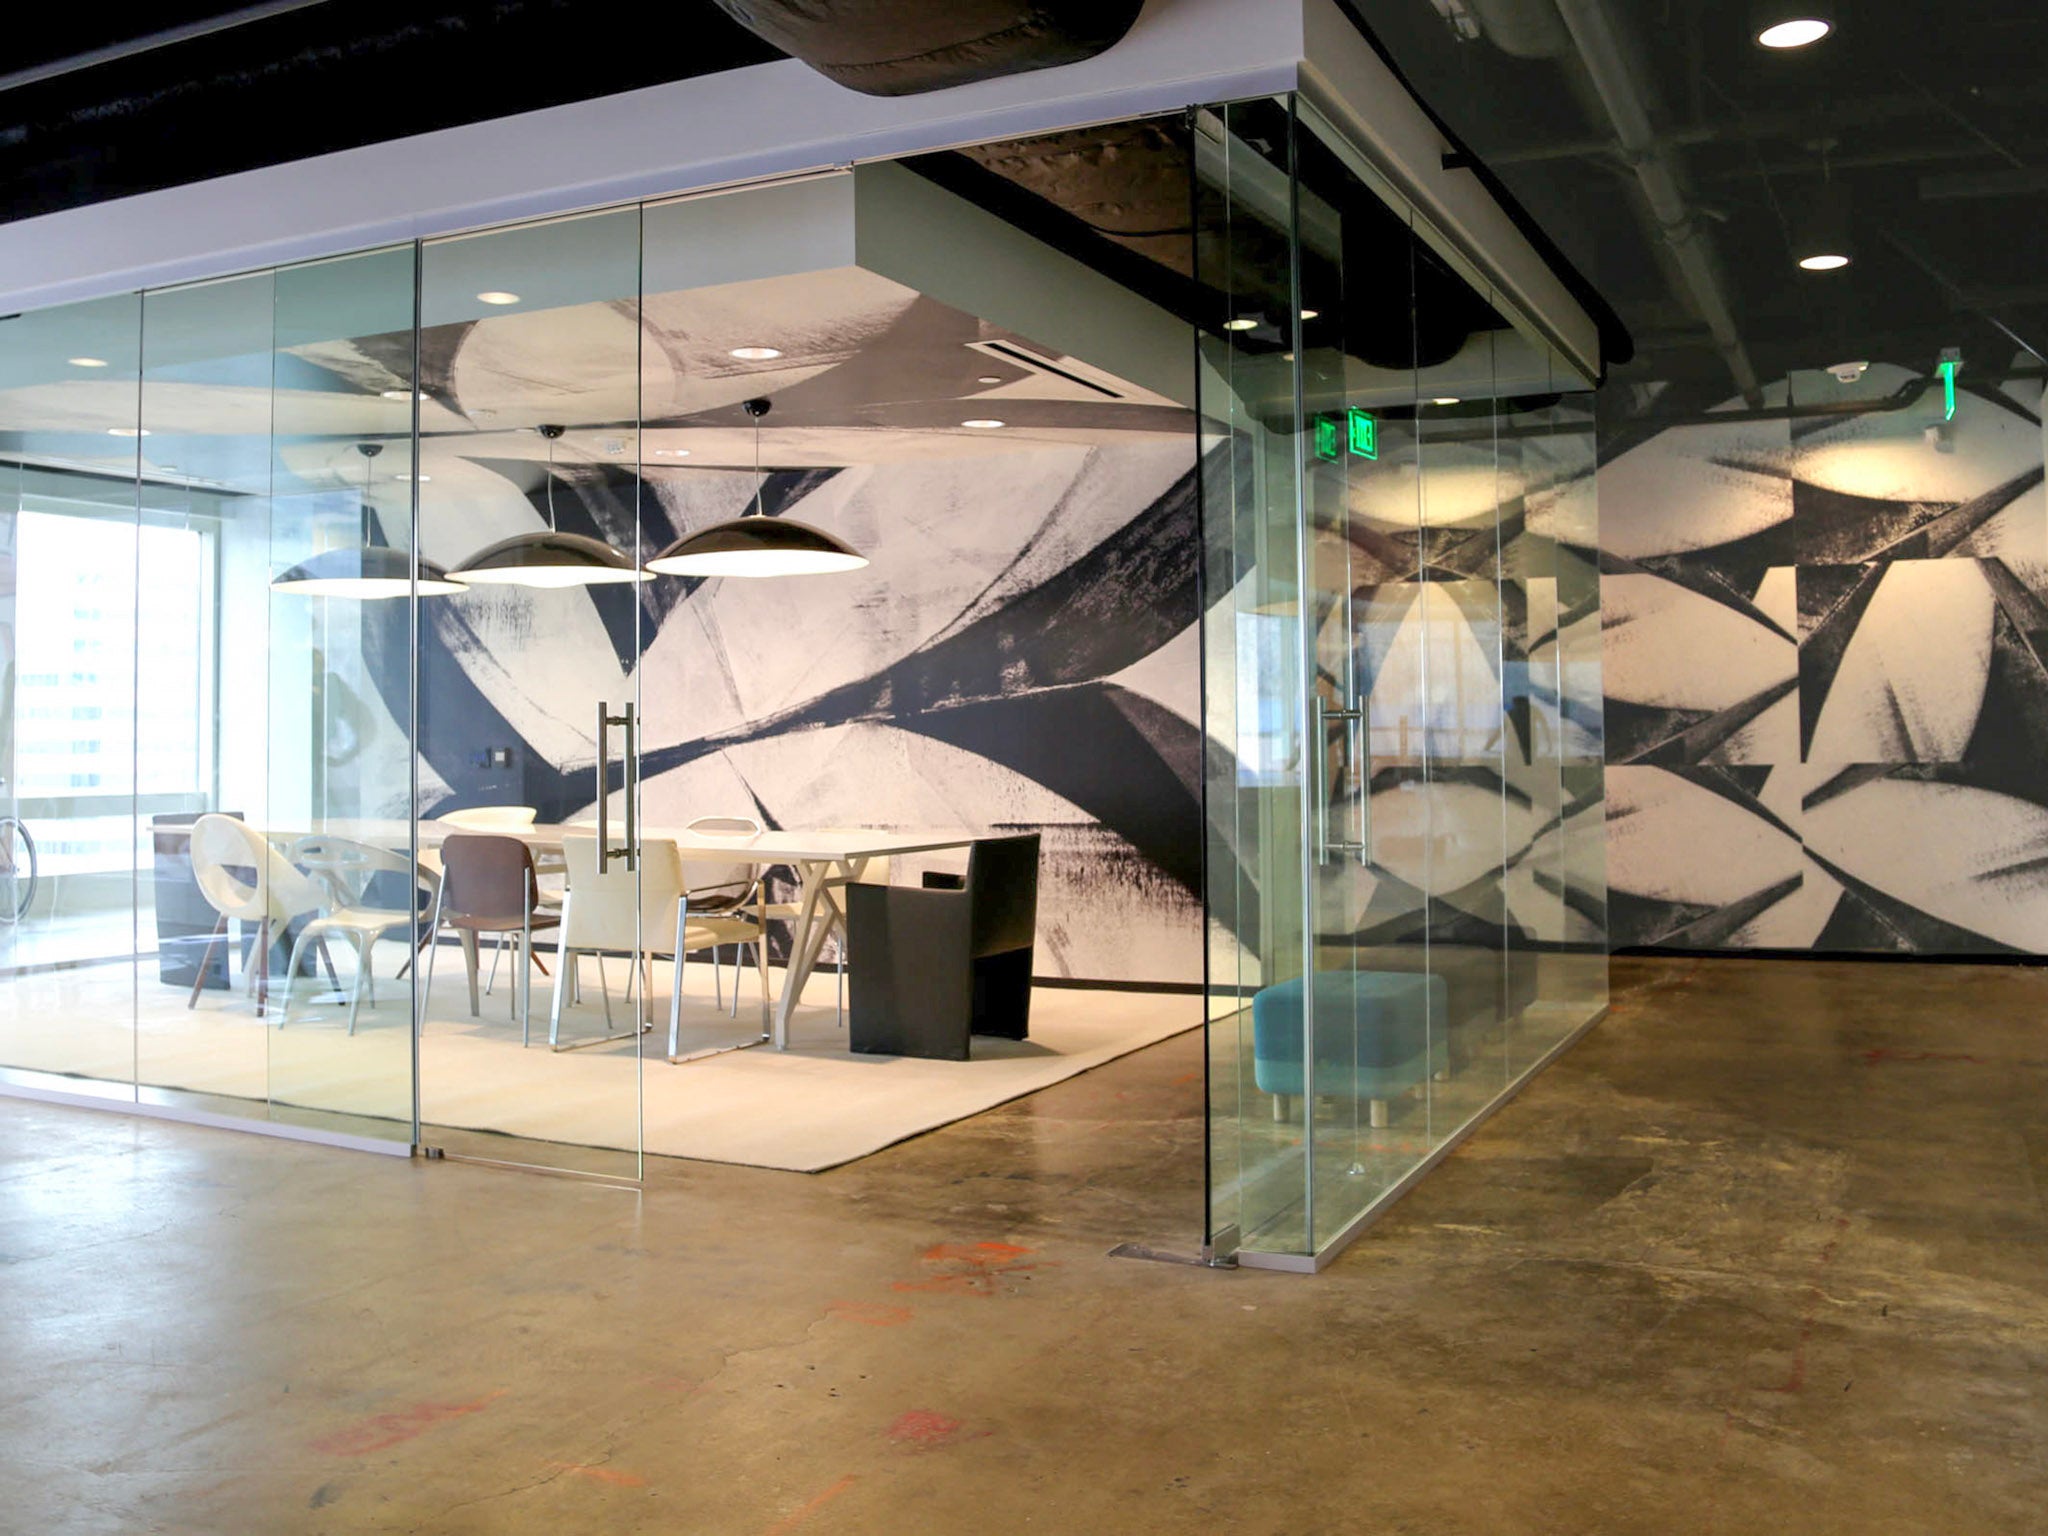 Chic conference room within Brookfield Design Hive with a custom black-and-white abstract wallcovering by WRAPPED Studio, inspired by Frank Stella's art, and modern lighting fixtures.